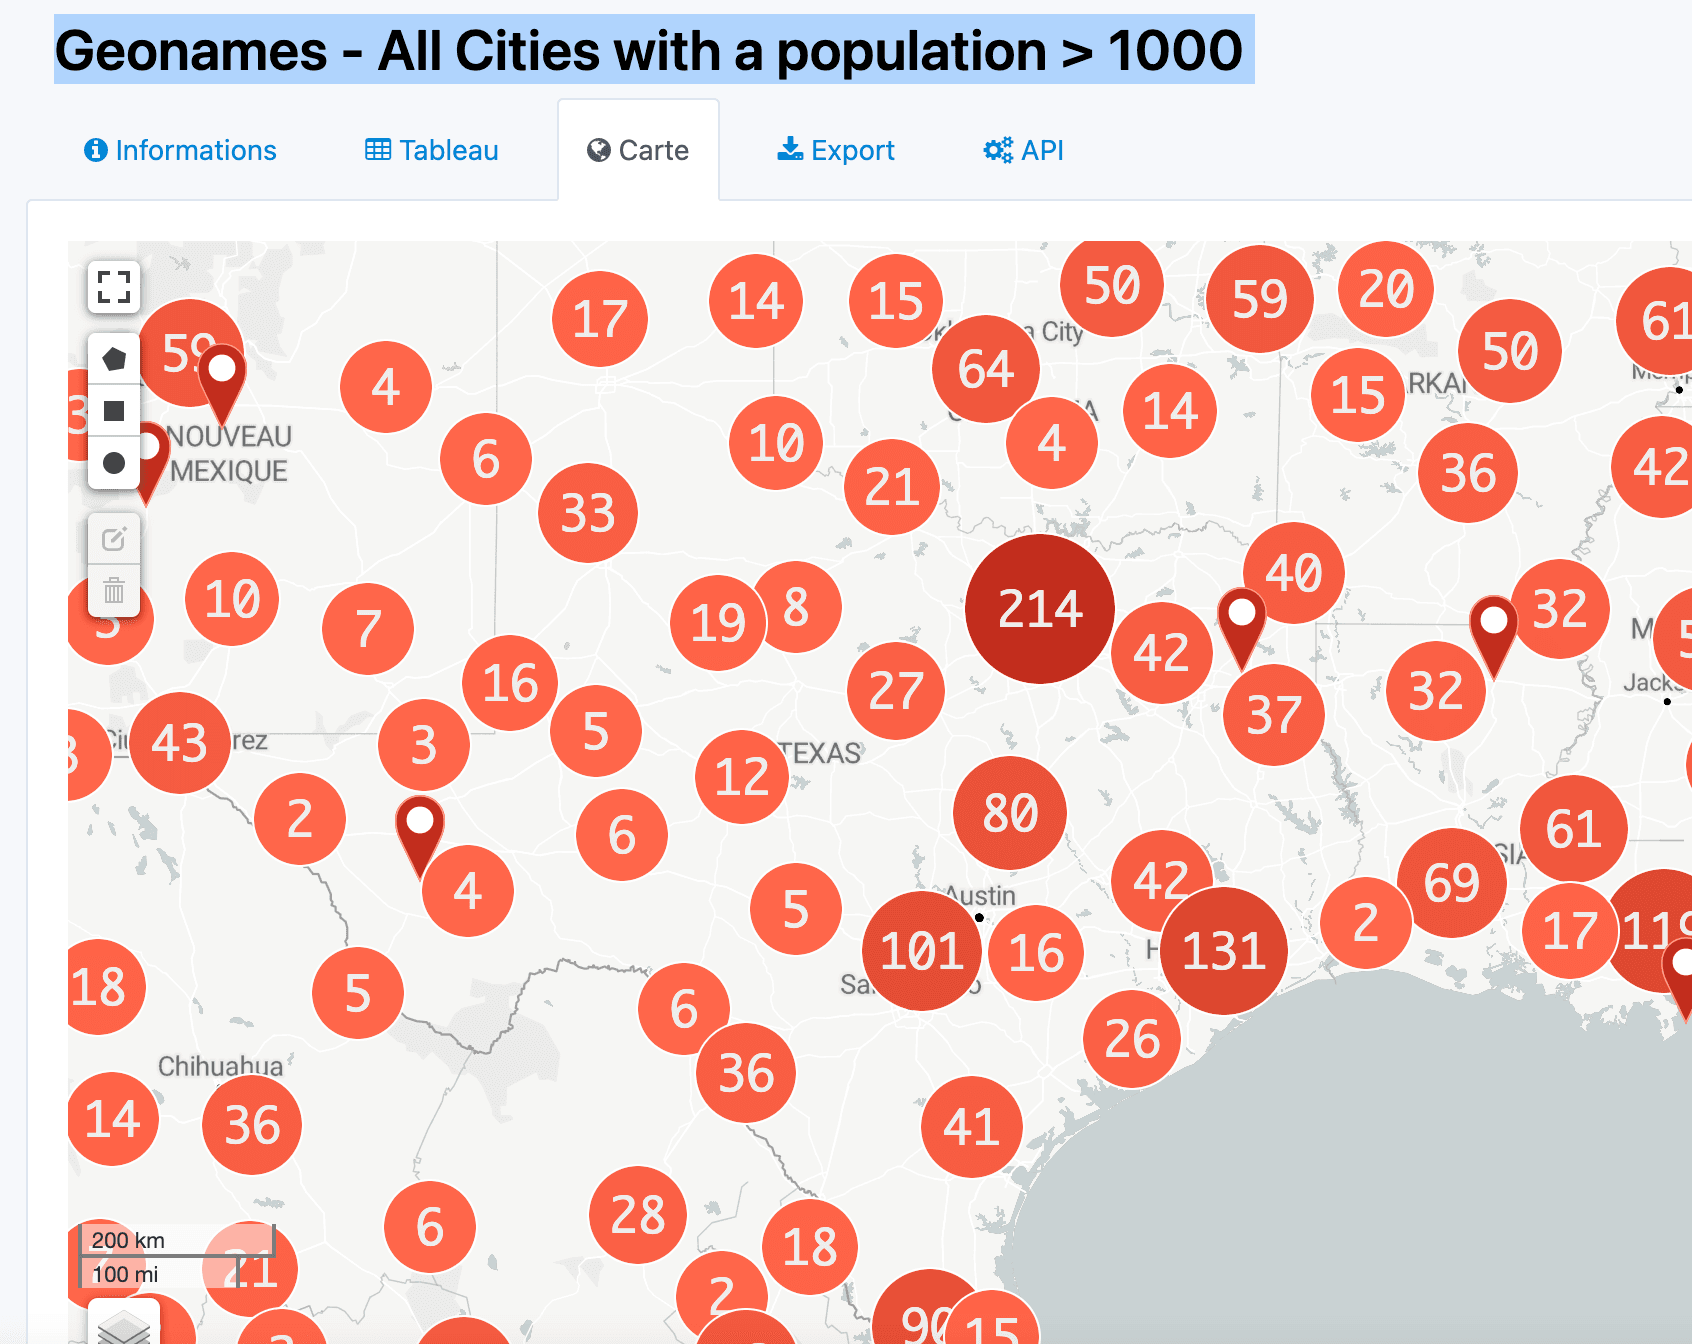 geonames all cities population sup 1000 texas region.png